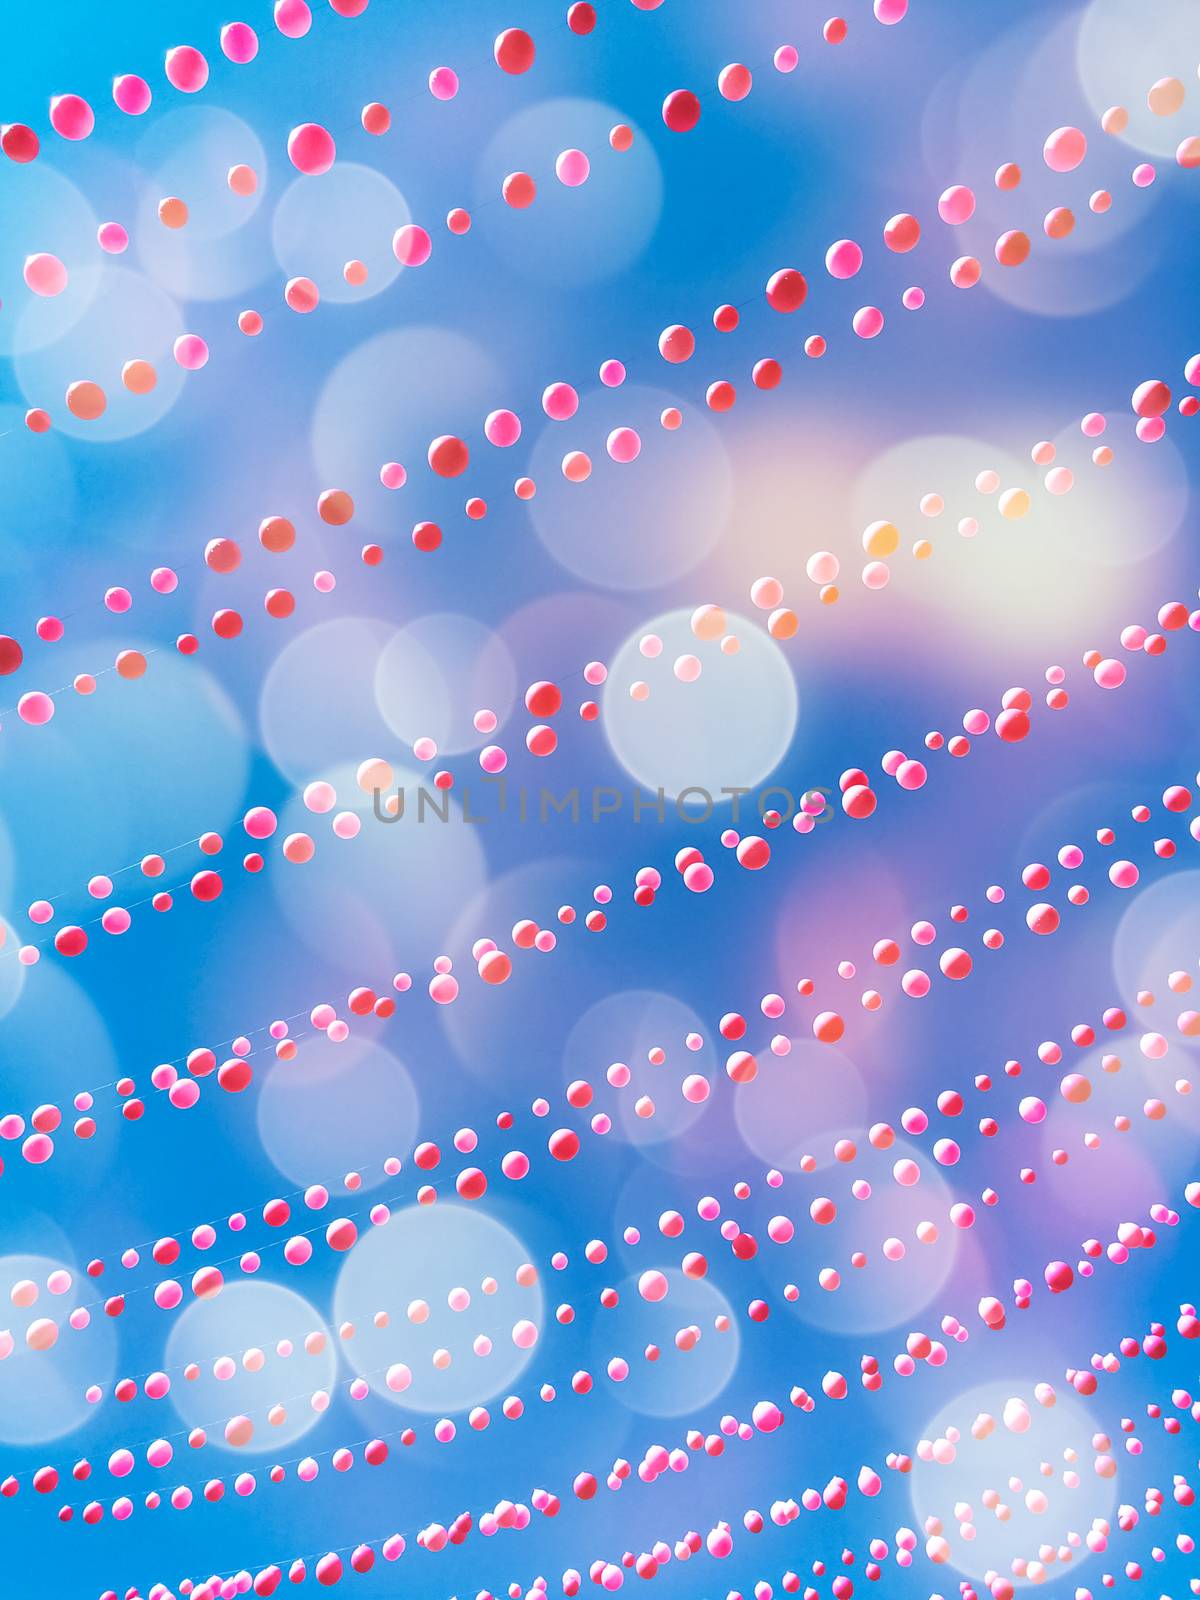 Party sky background with balloon decorations and bokeh lights. Ste-Catherine street, gay village neighborhood in Montreal (Quebec, Canada).